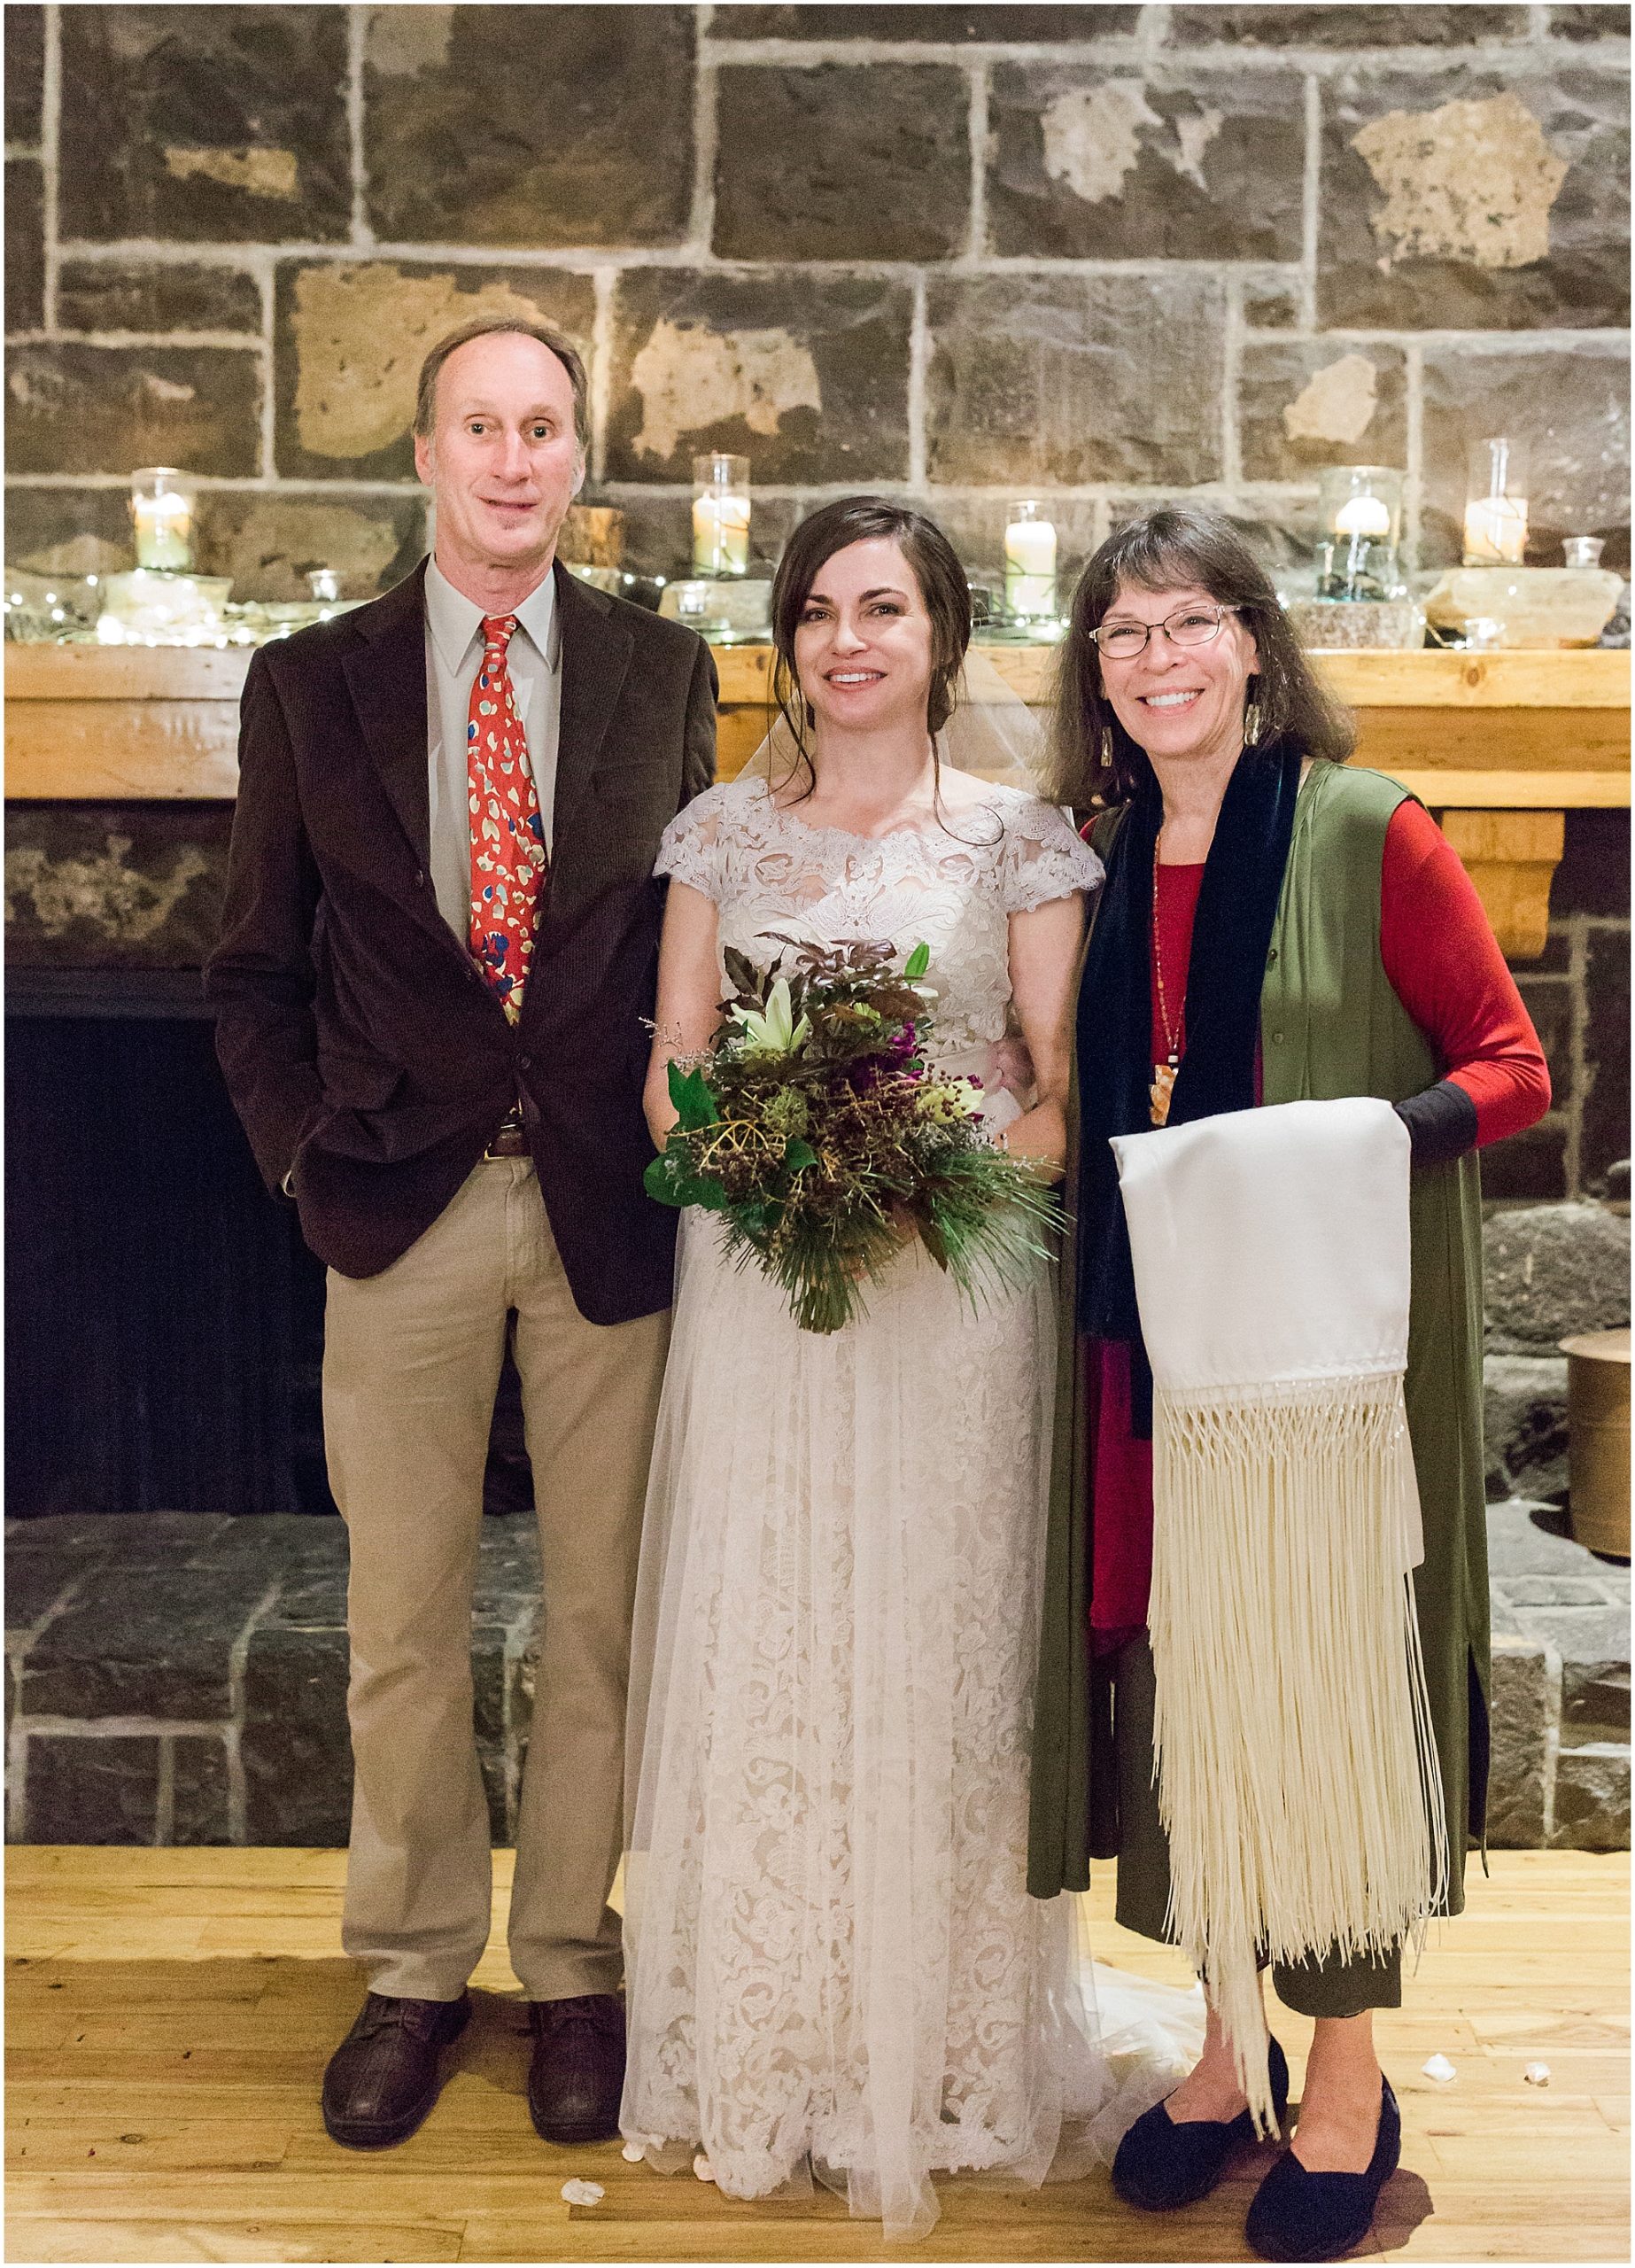 The bride with her parents on her wedding day at Sunriver Resort in Oregon. | Erica Swantek Photography